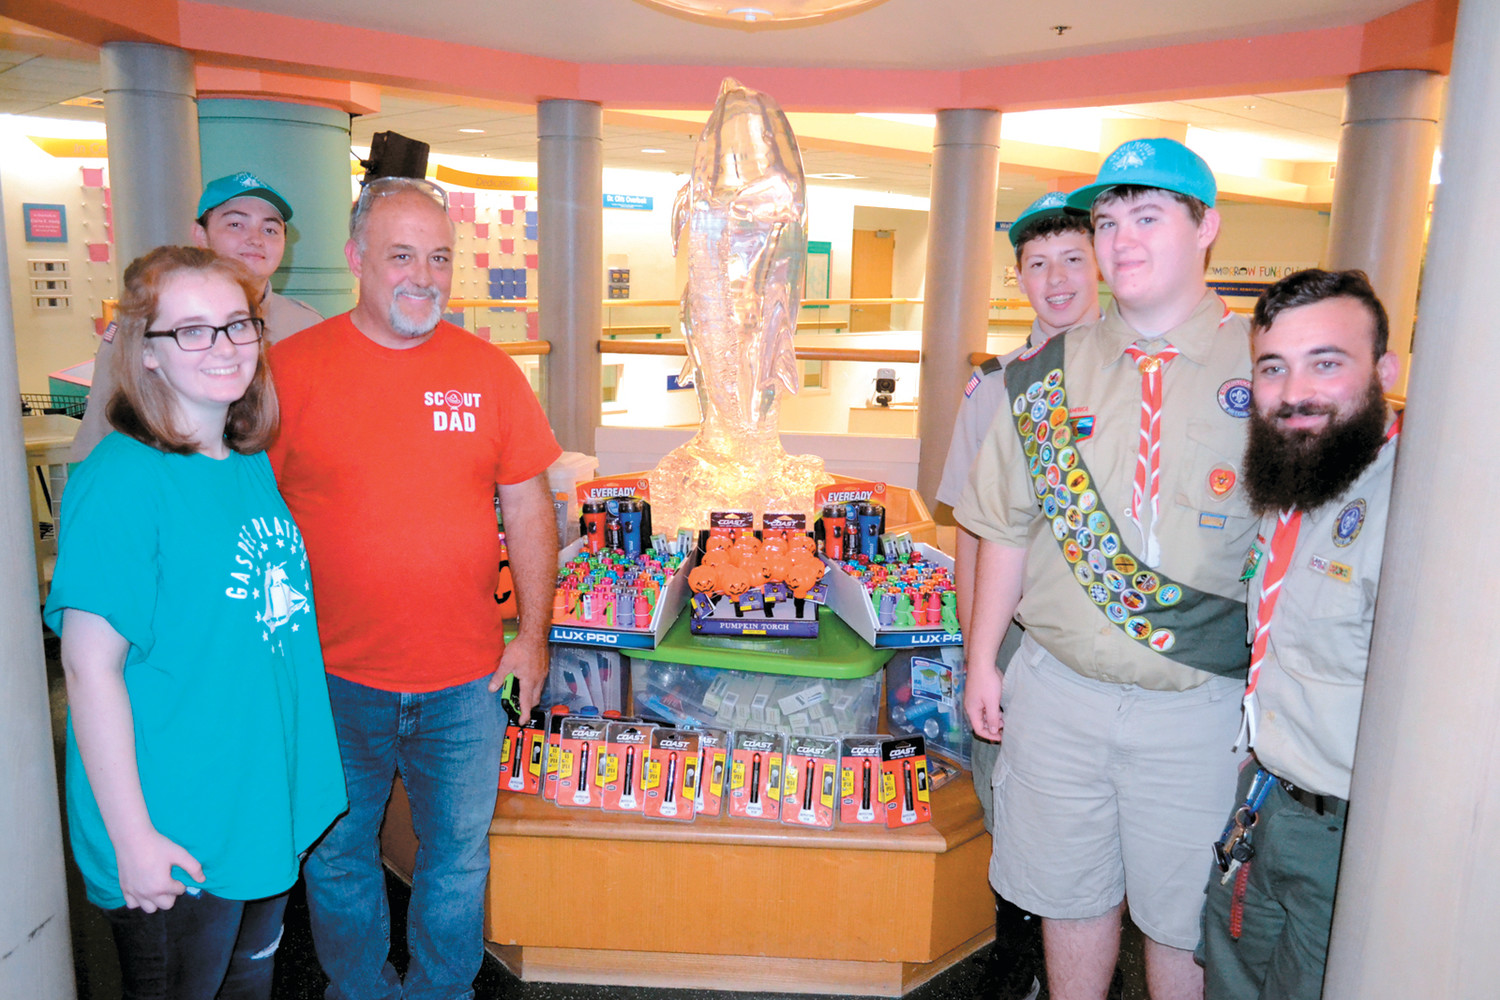 GUIDING LIGHTS: Eion Daniels (right middle) and his fellow Scouts Mitchell Carvalho (left middle), Ben McQuade (right, rear) and David Tibbitts (right front), his sister Mollee and father Tom prepare the flashlights for Hasbro staff on Thursday afternoon.